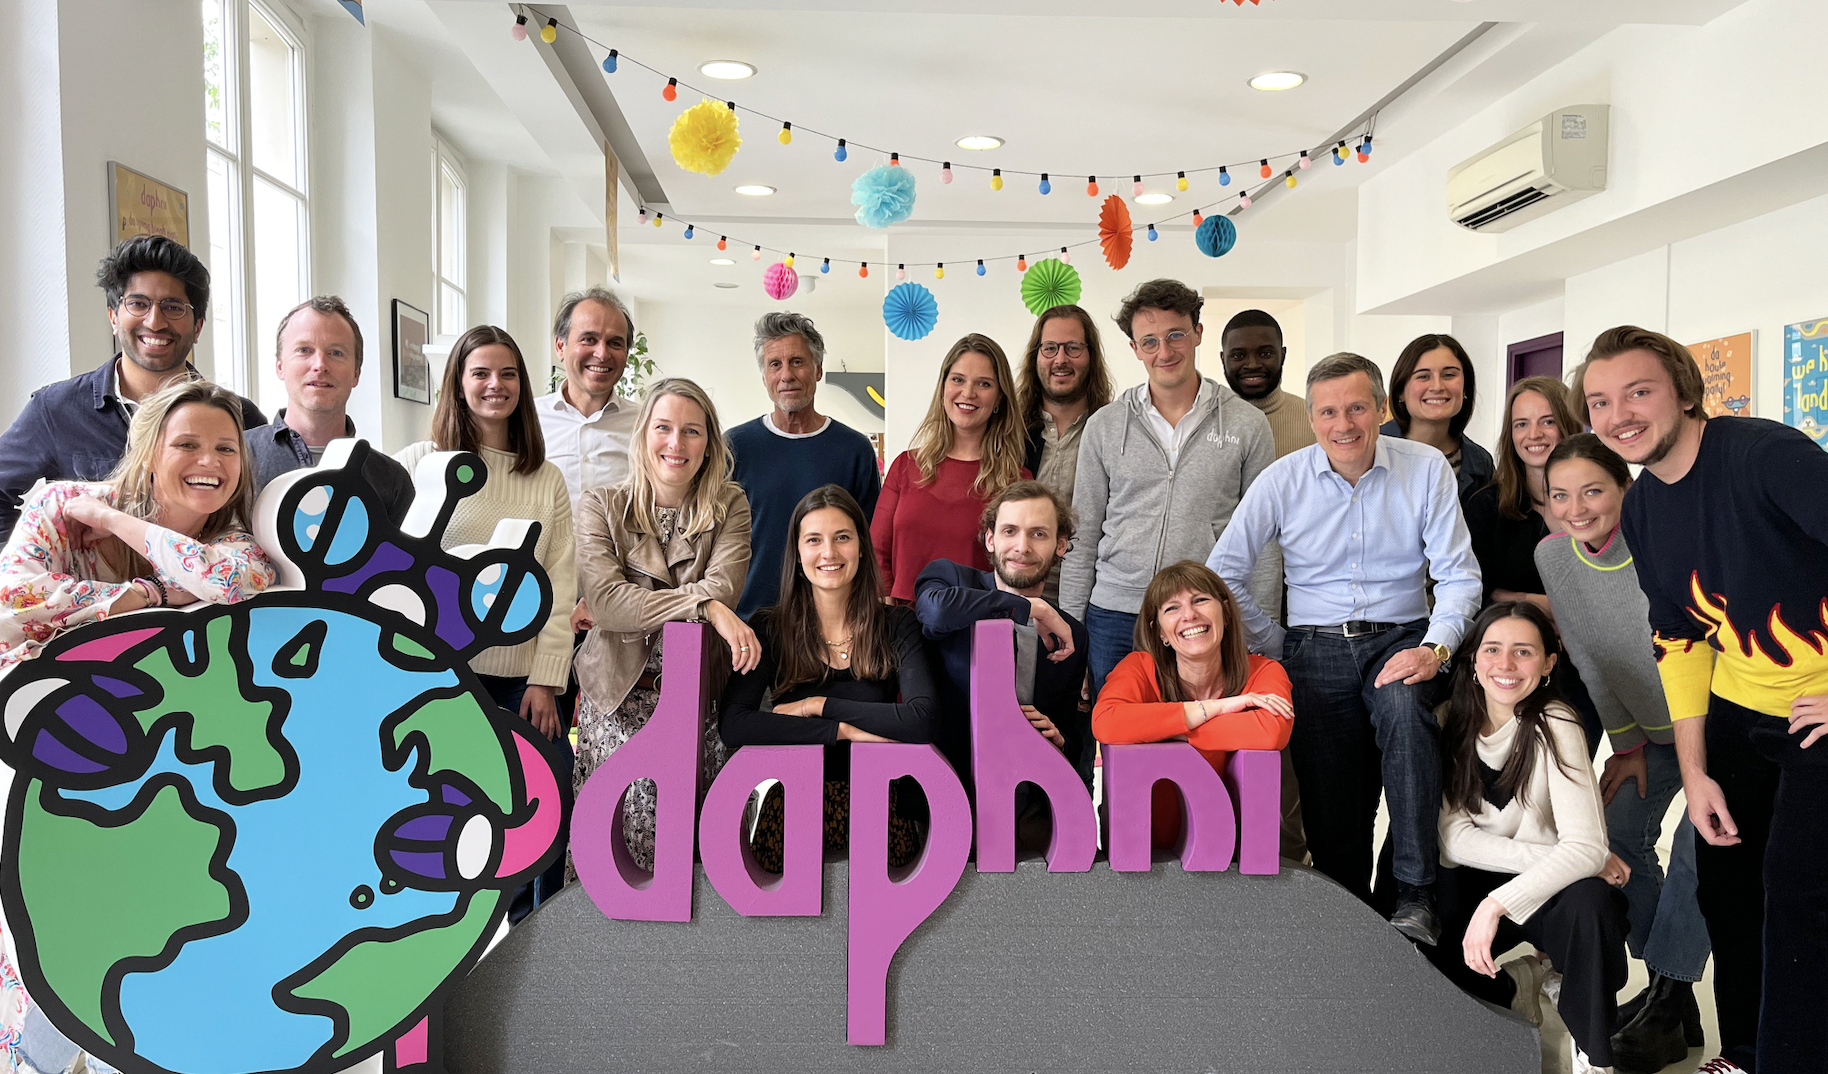 Daphni is one of the top early-stage investors in France